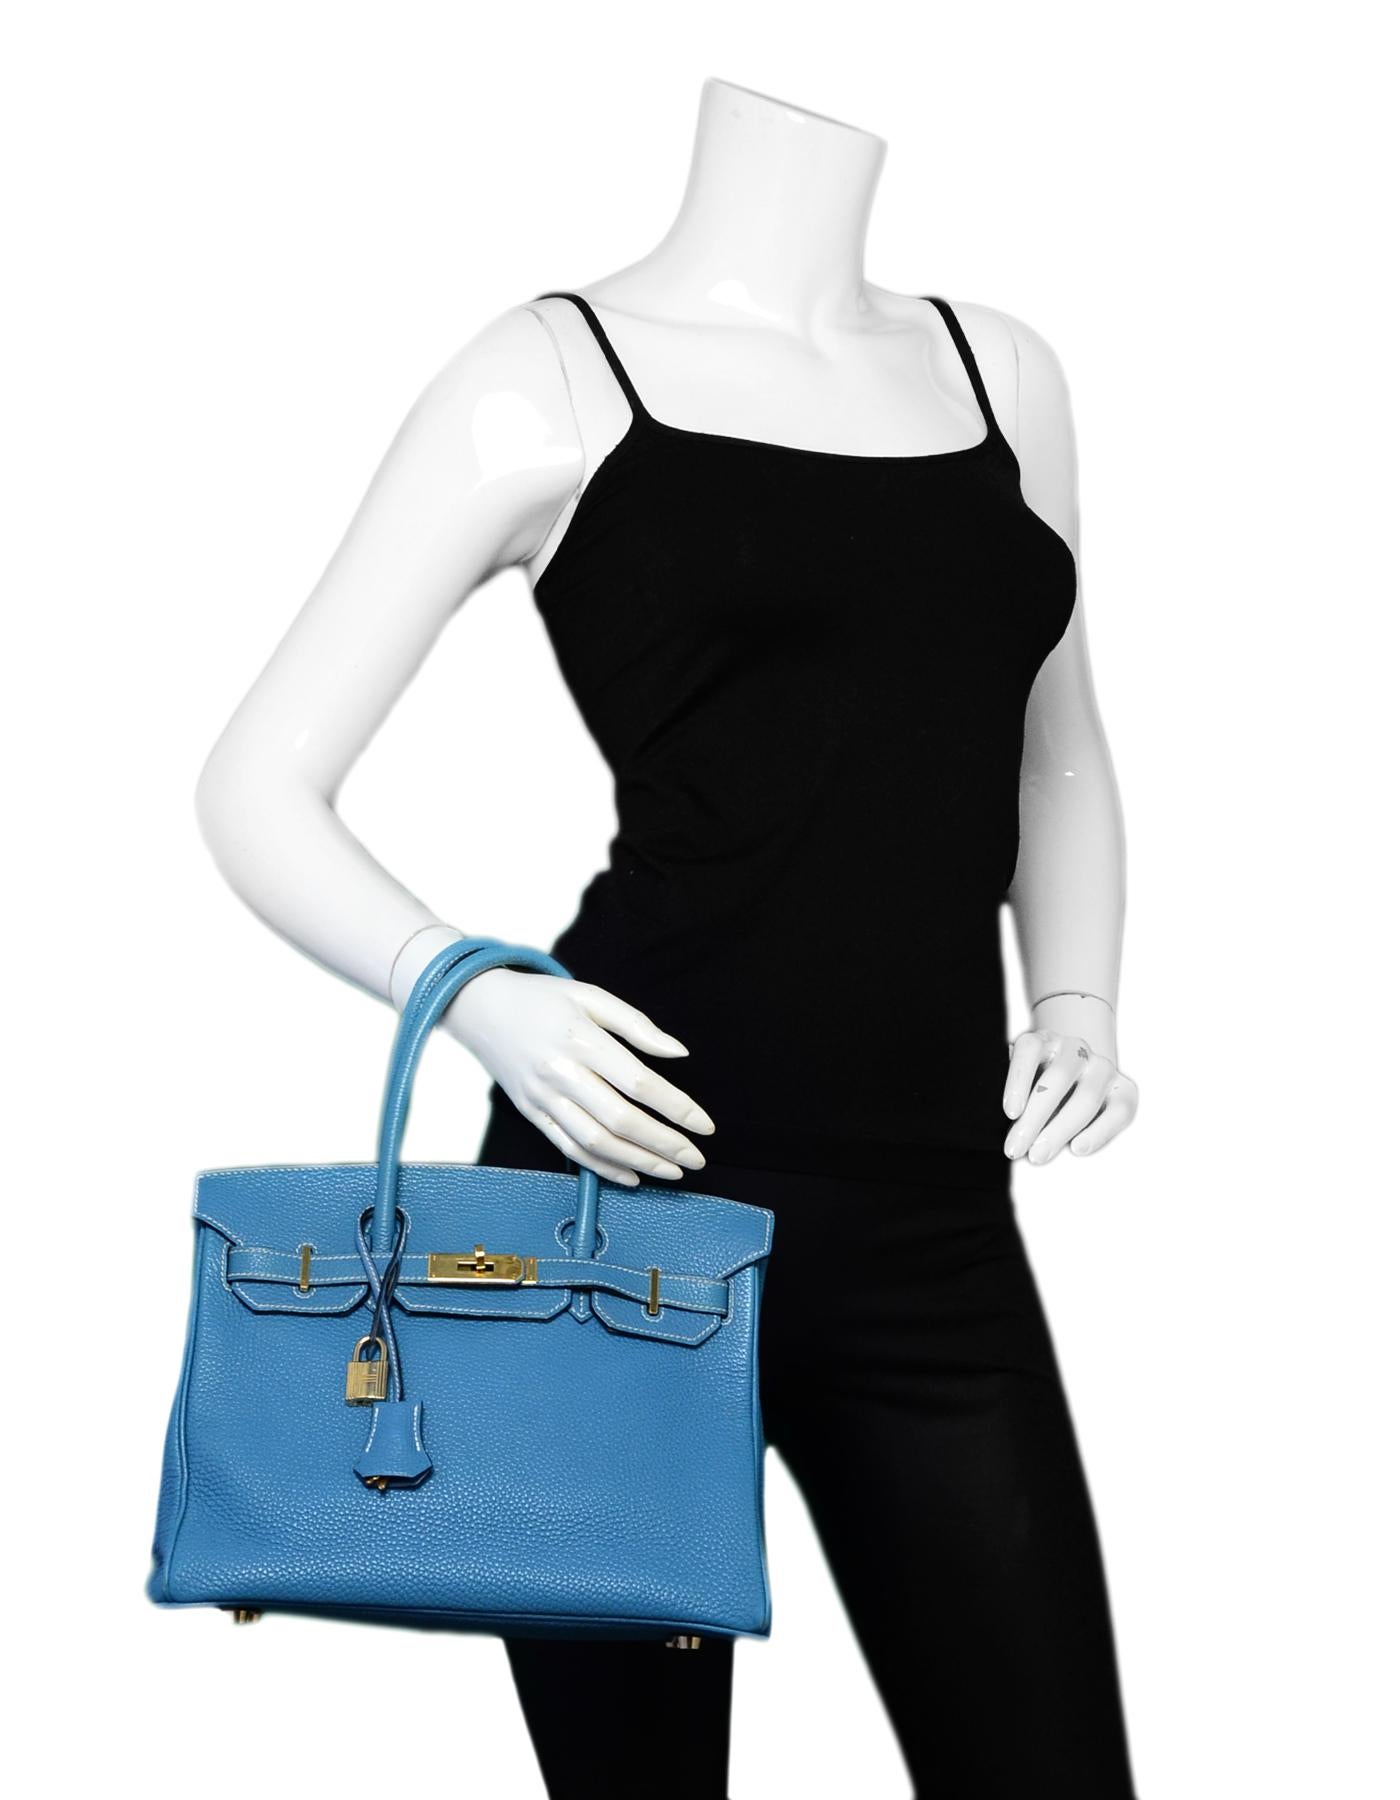 Hermes Blue Jean 30cm Birkin Bag

Made In: France
Year of Production: 2004
Color: Blue jean
Hardware: Goldtone hardware
Materials: Togo leather
Lining: Blue chevre leather
Closure/Opening: Leather draw strap closure with rotating clasp
Exterior